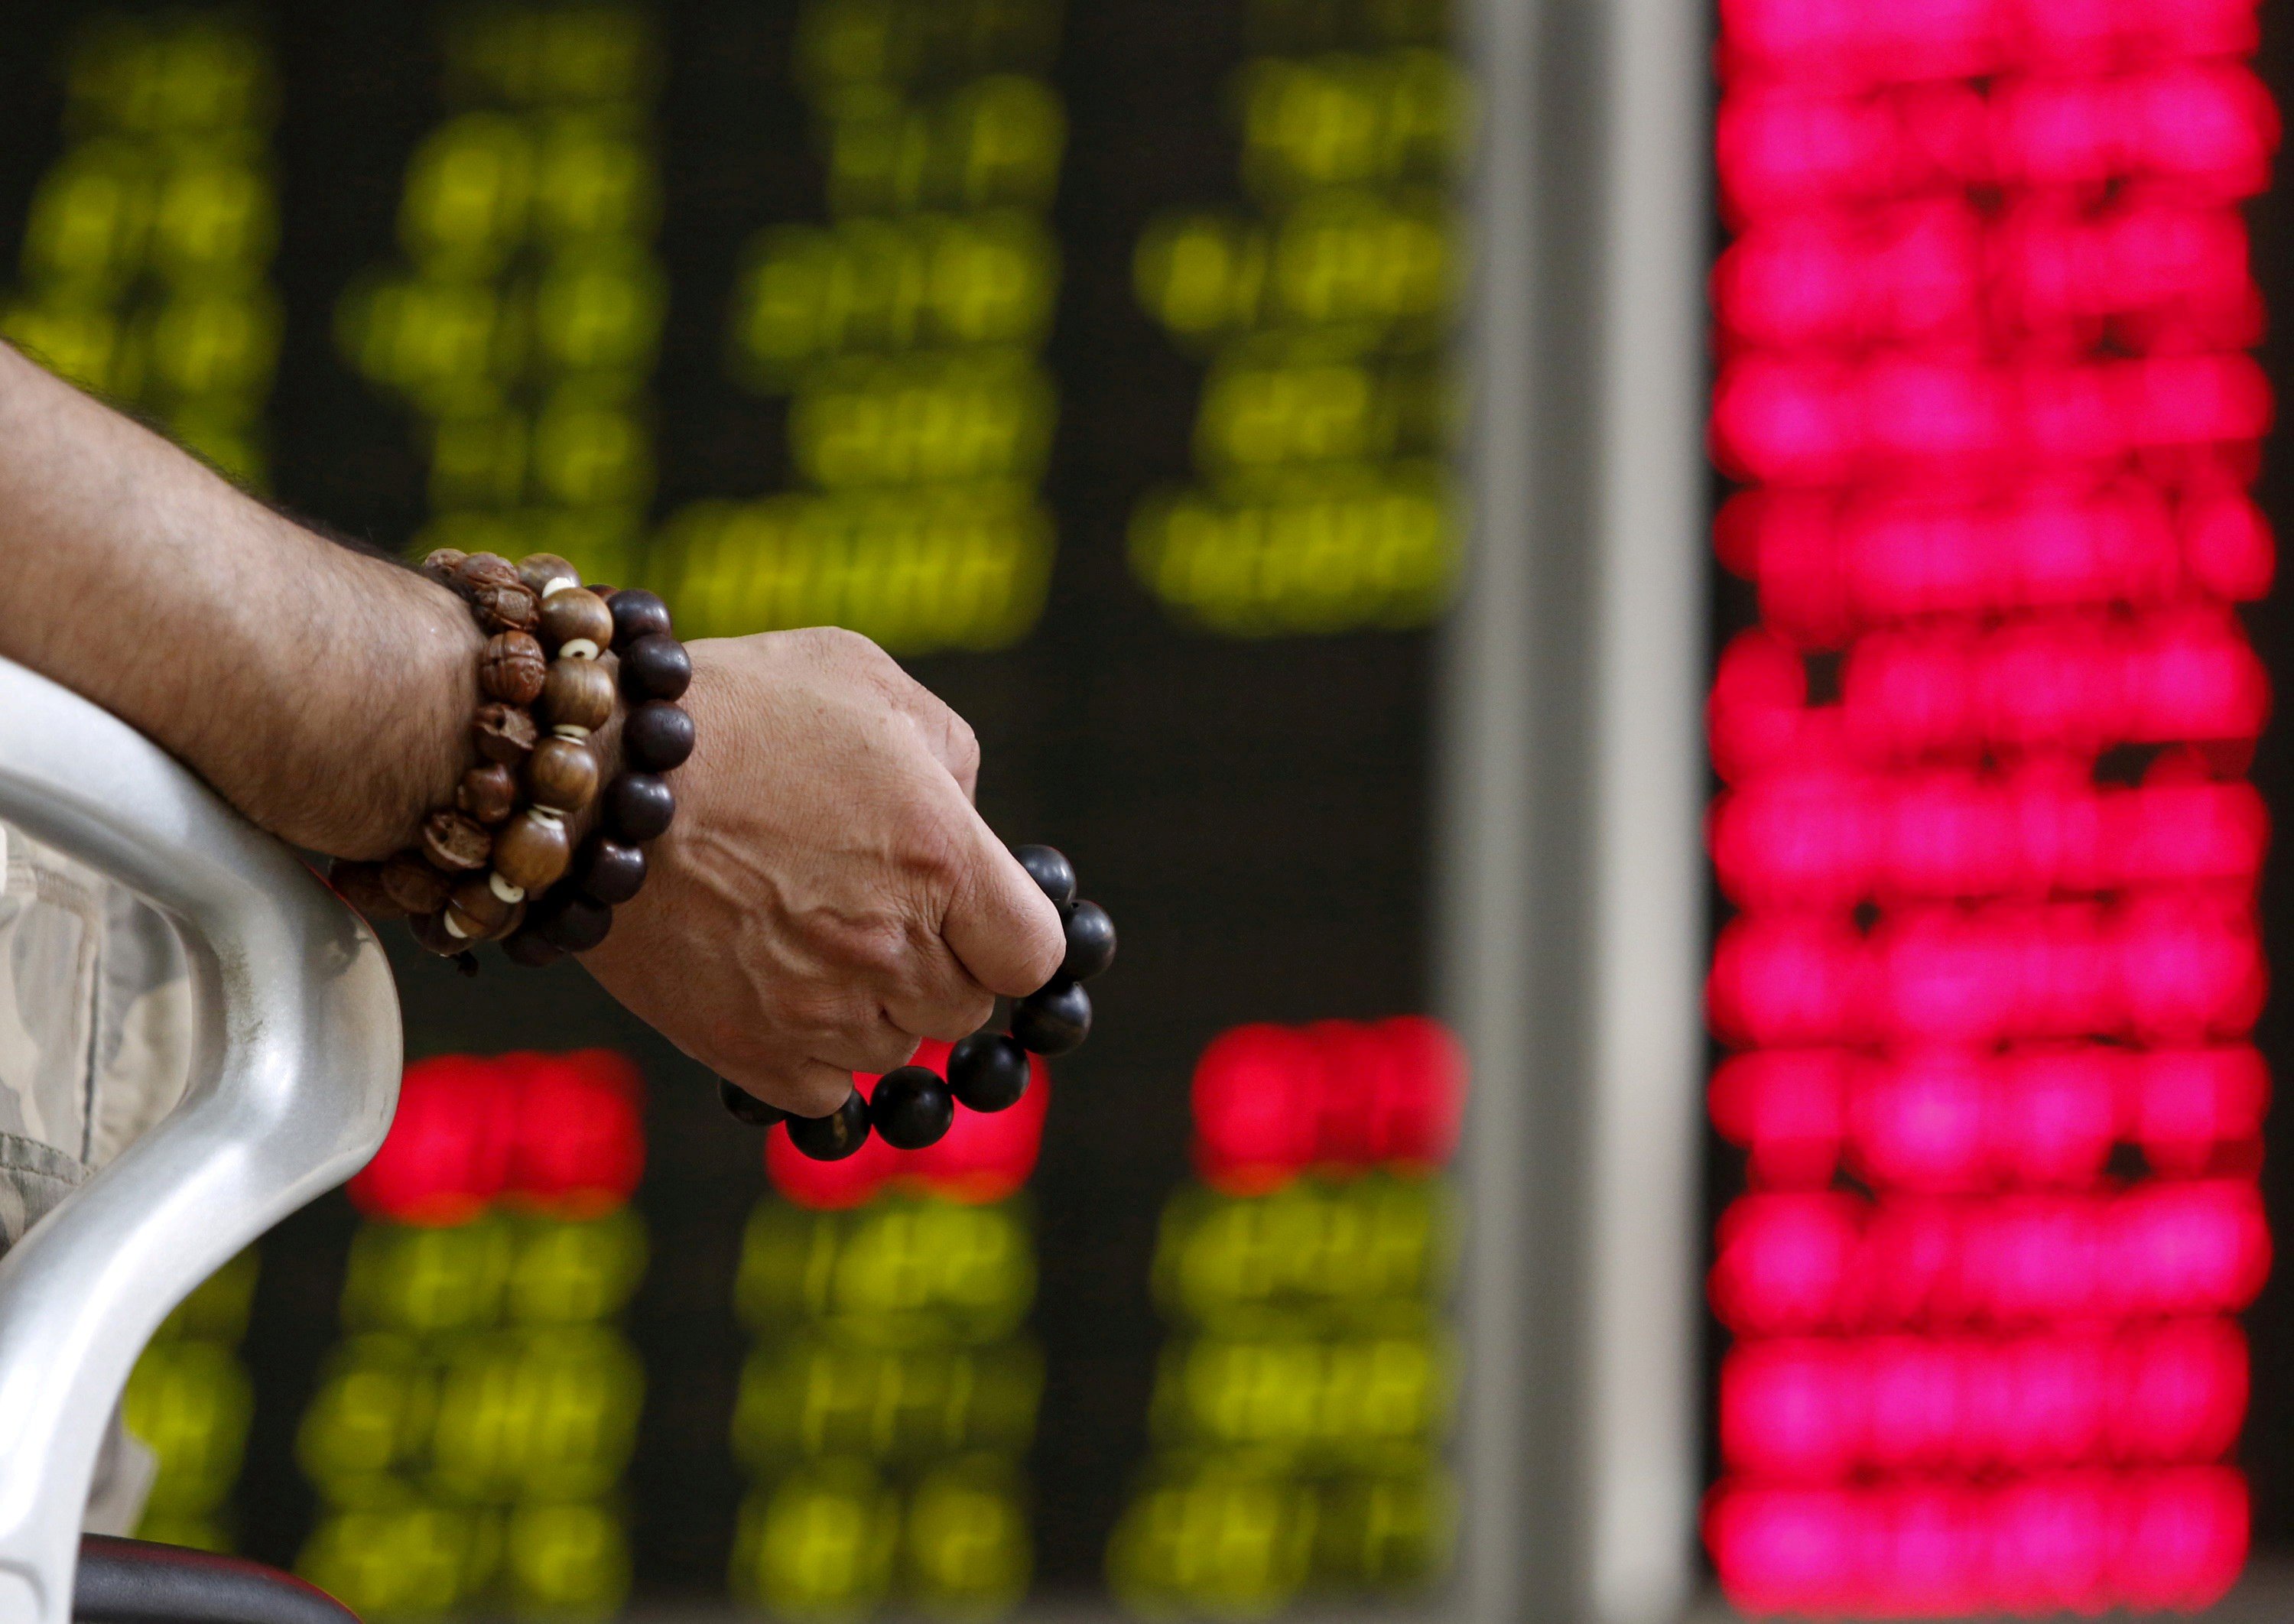 Index provider MSCI has added shares that bring the China country weight to one-third in the emerging market index. Photo: Reuters